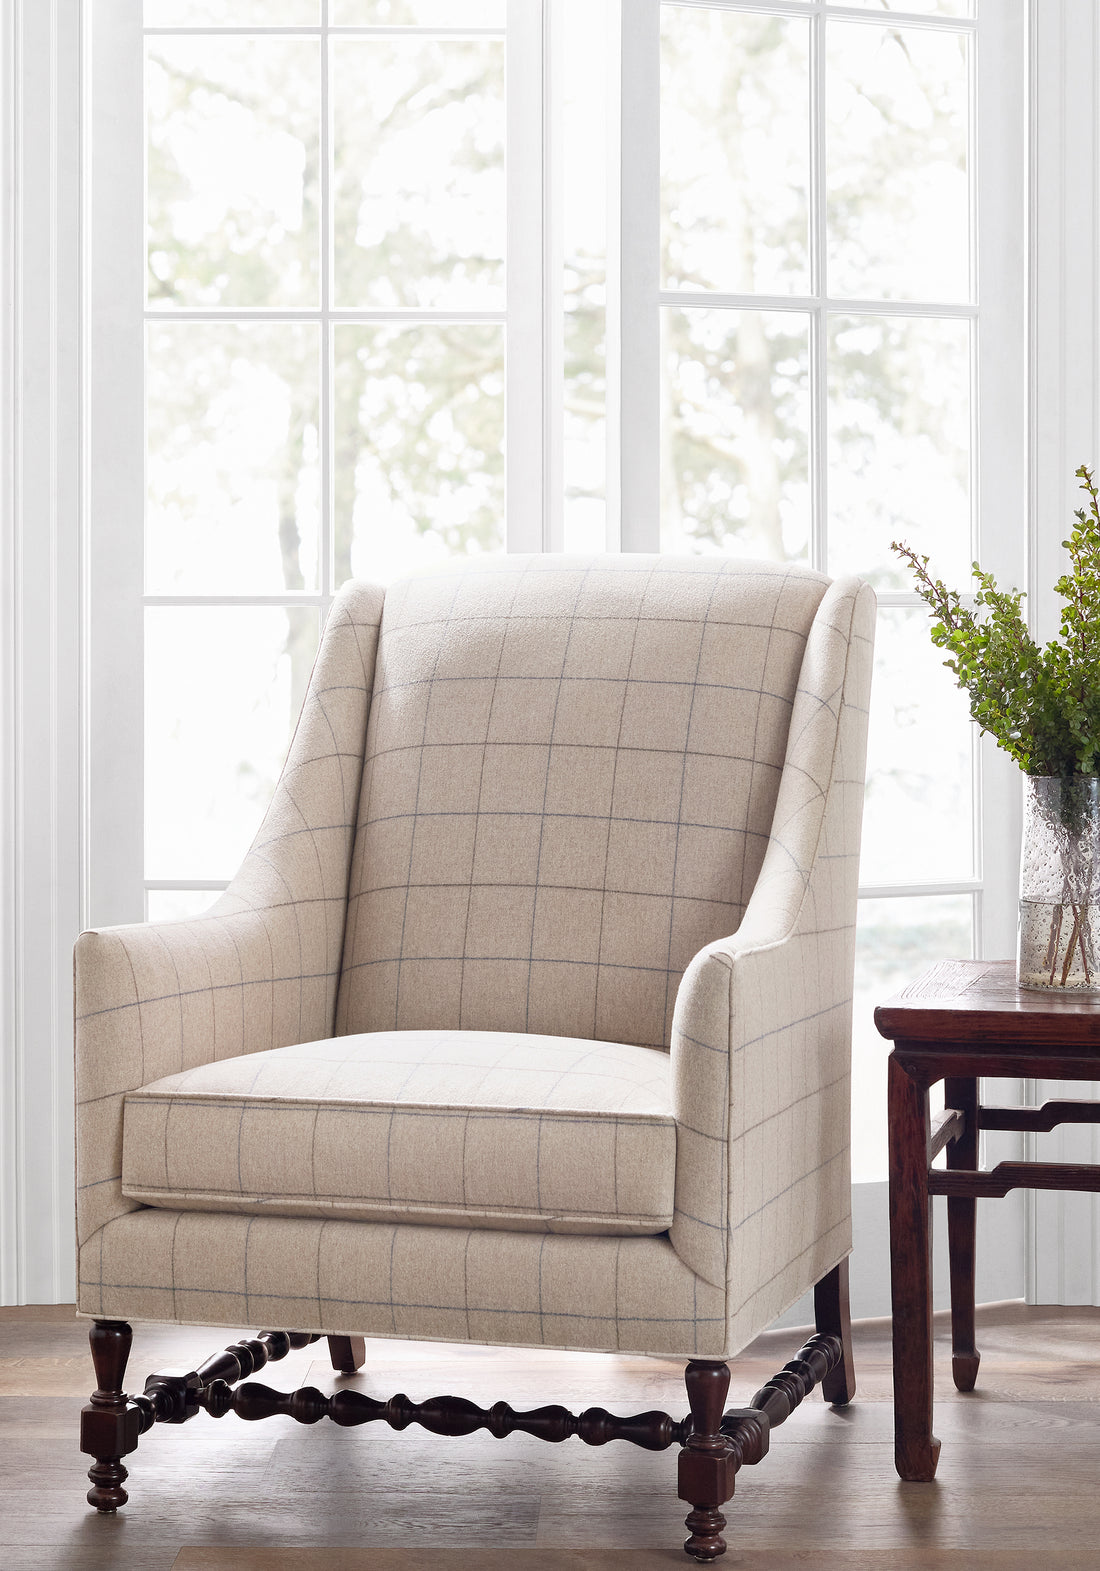 Salem Wing Chair in Ravello woven fabric in cinnamon color - pattern number W8100 - by Thibaut in the Sereno collection